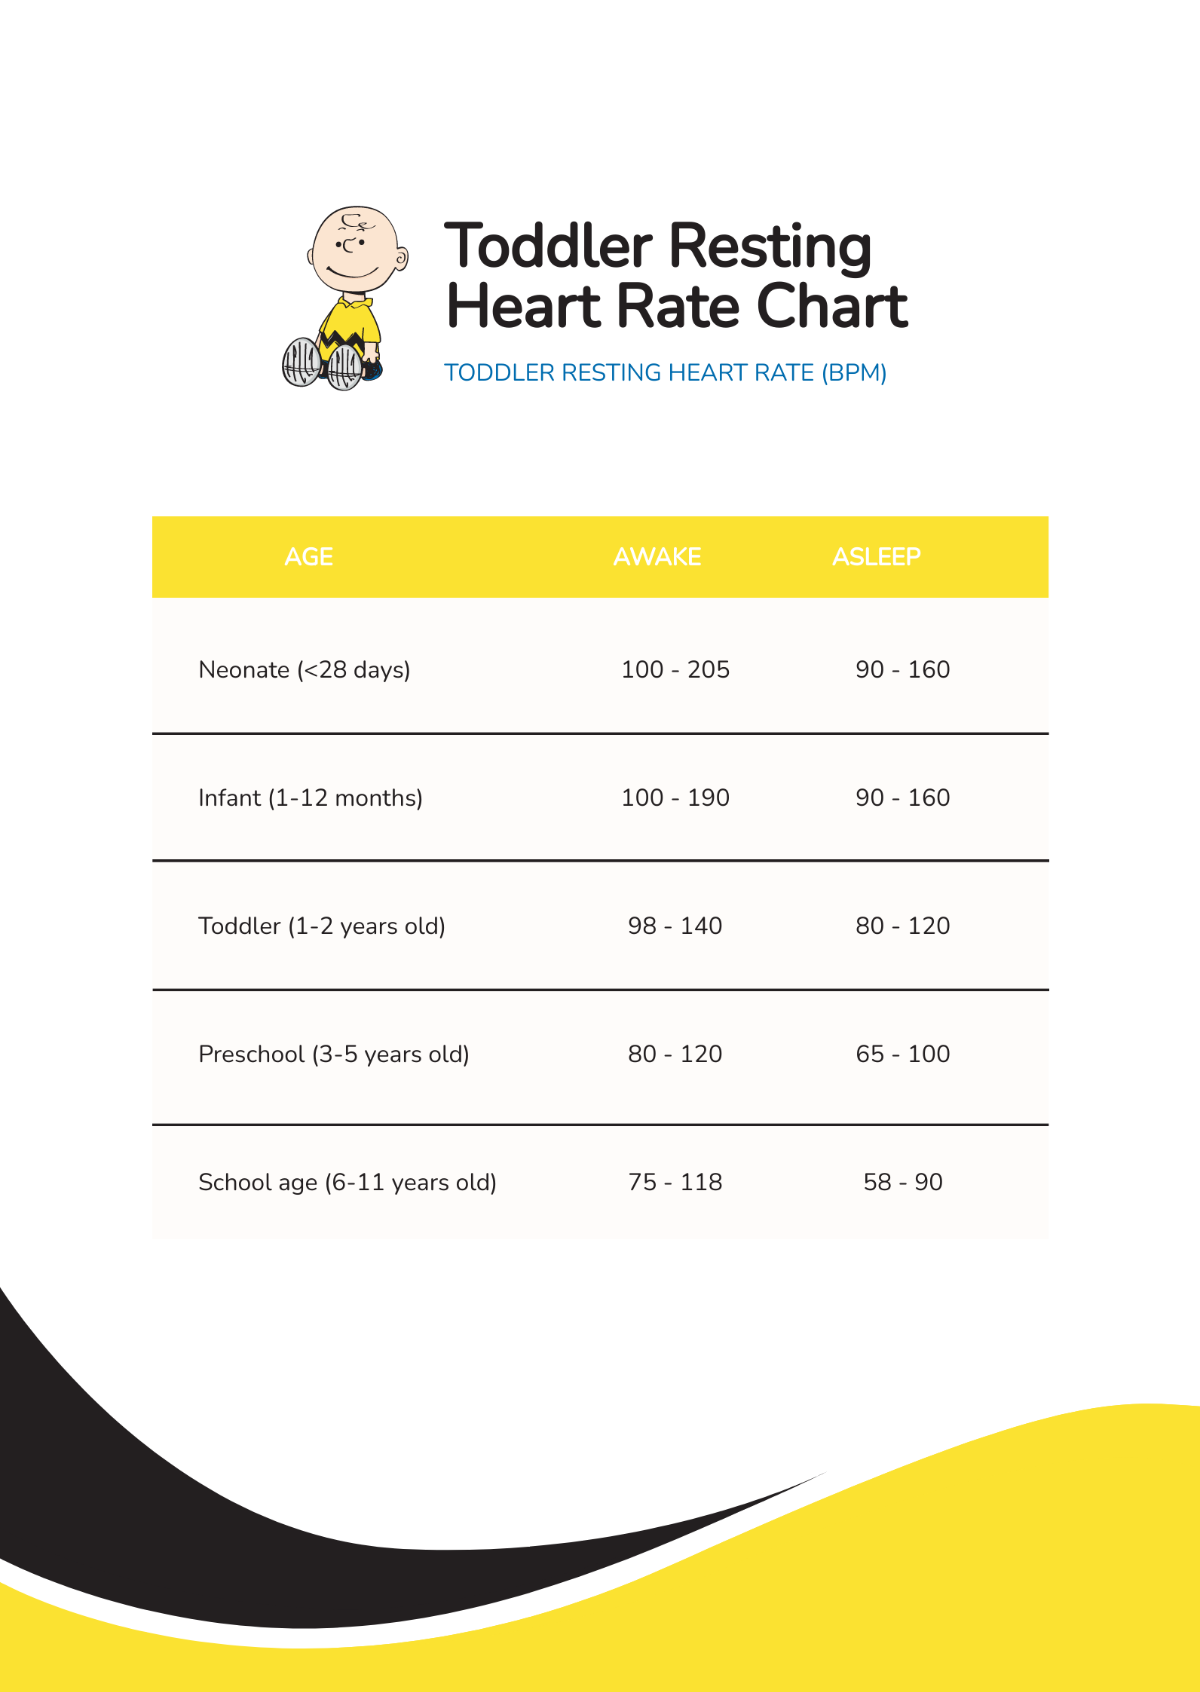 Toddler Resting Heart Rate Chart